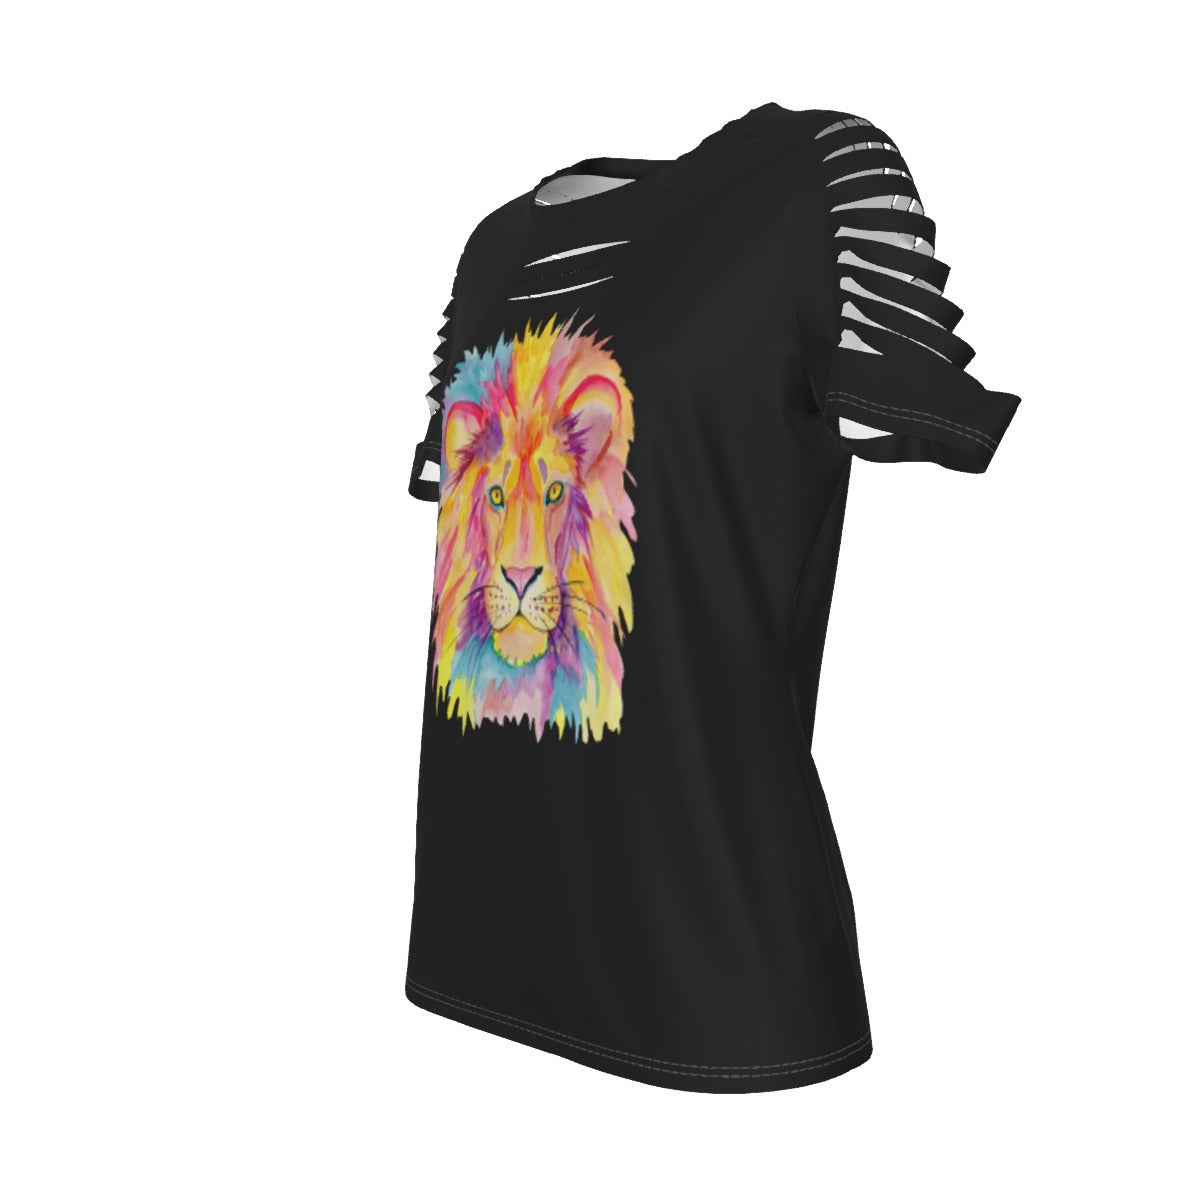 Colorful Lion Women's Ripped T-Shirt